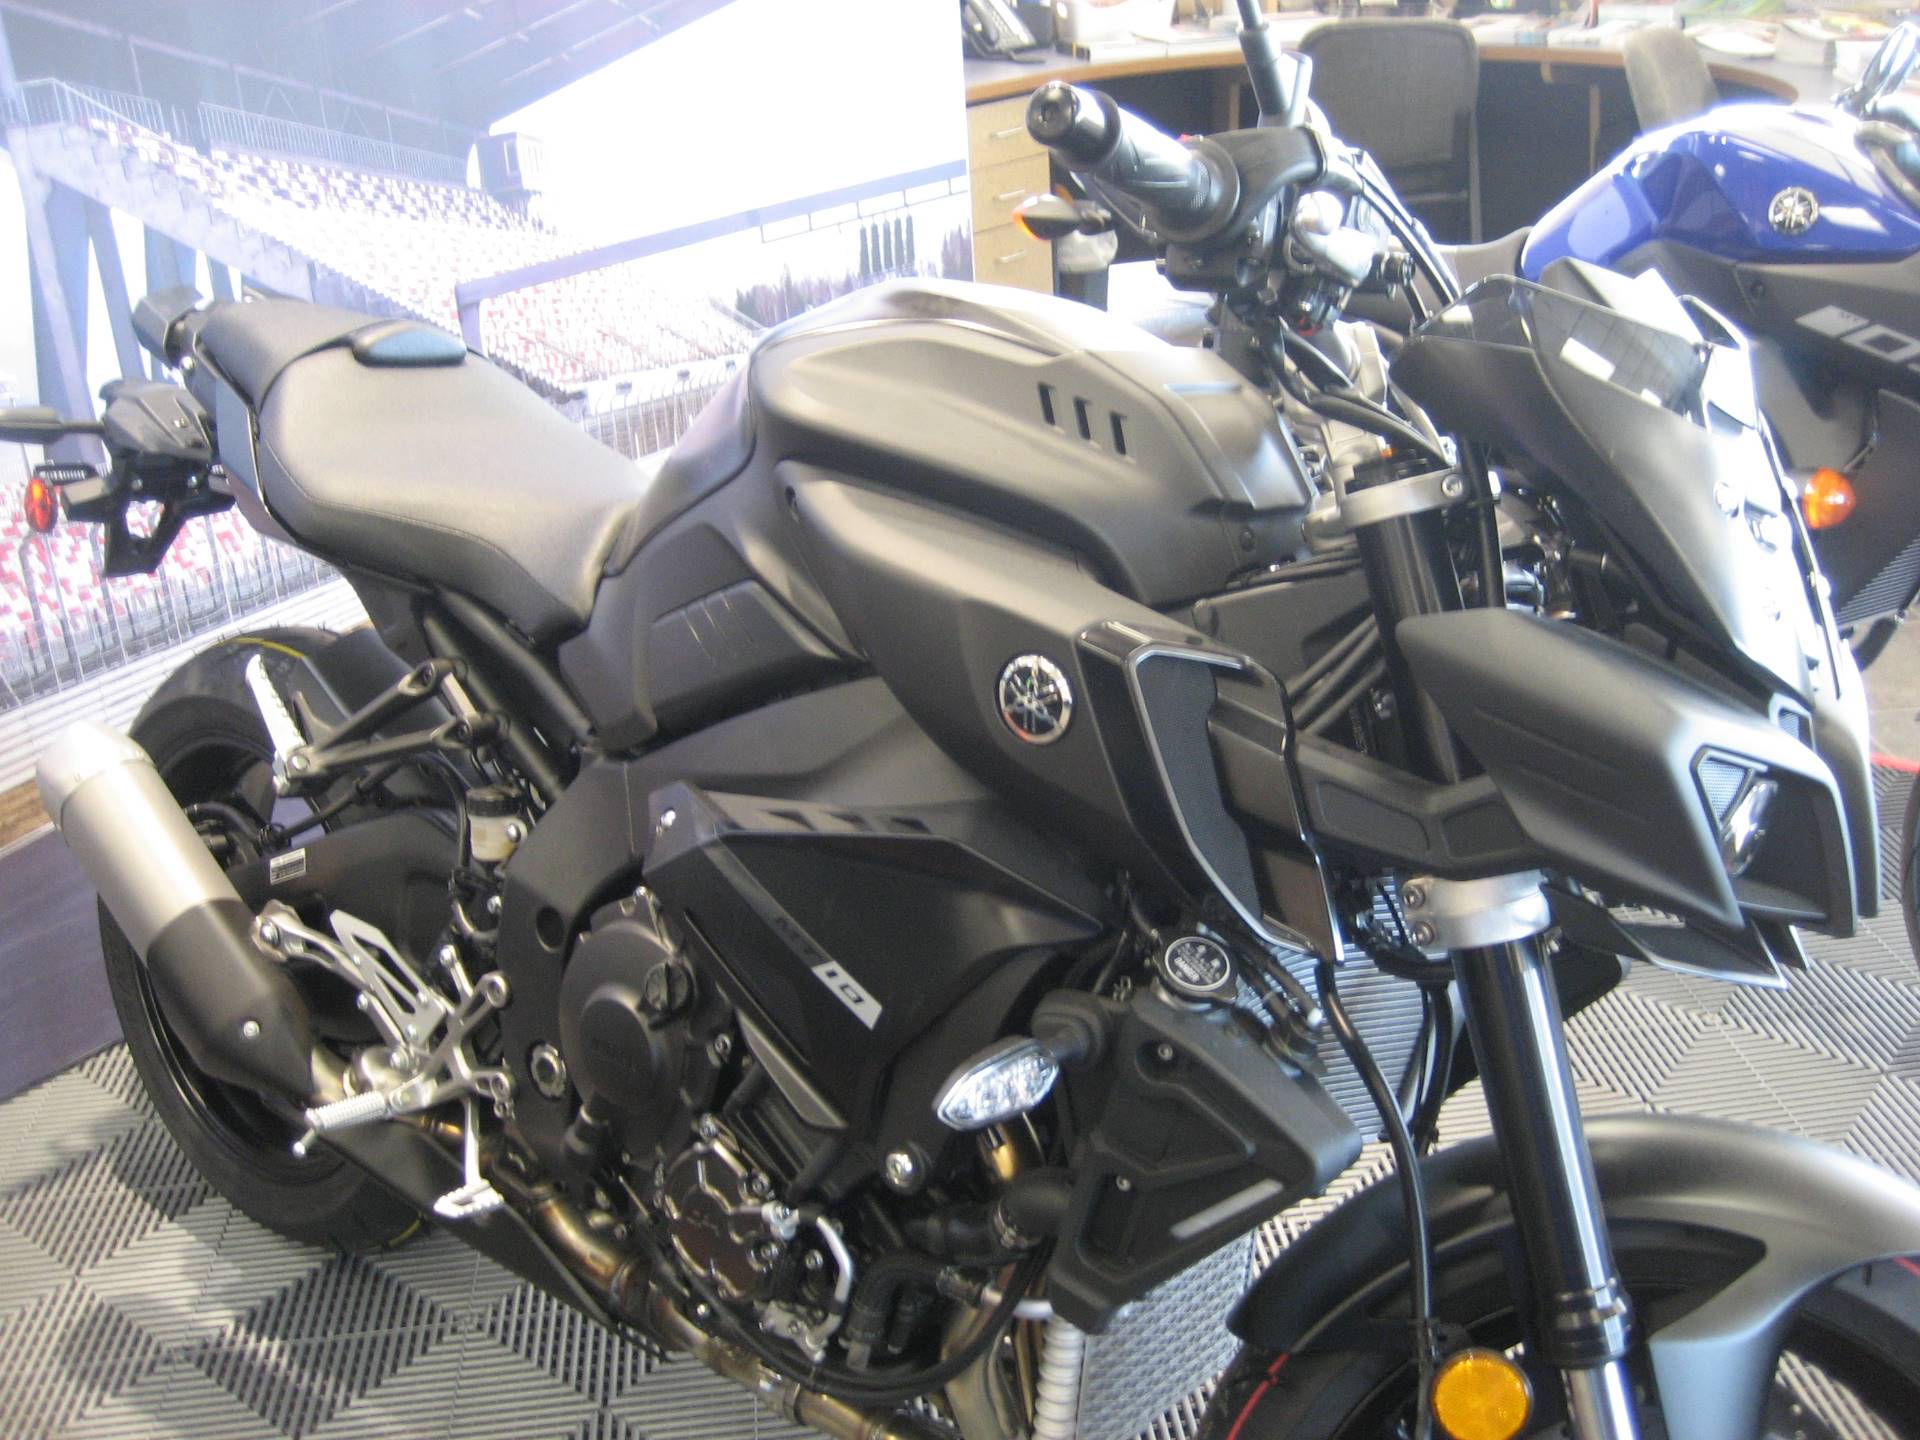 New 2020 Yamaha Mt 10 Motorcycles In Shawnee Ok Stock Number N A